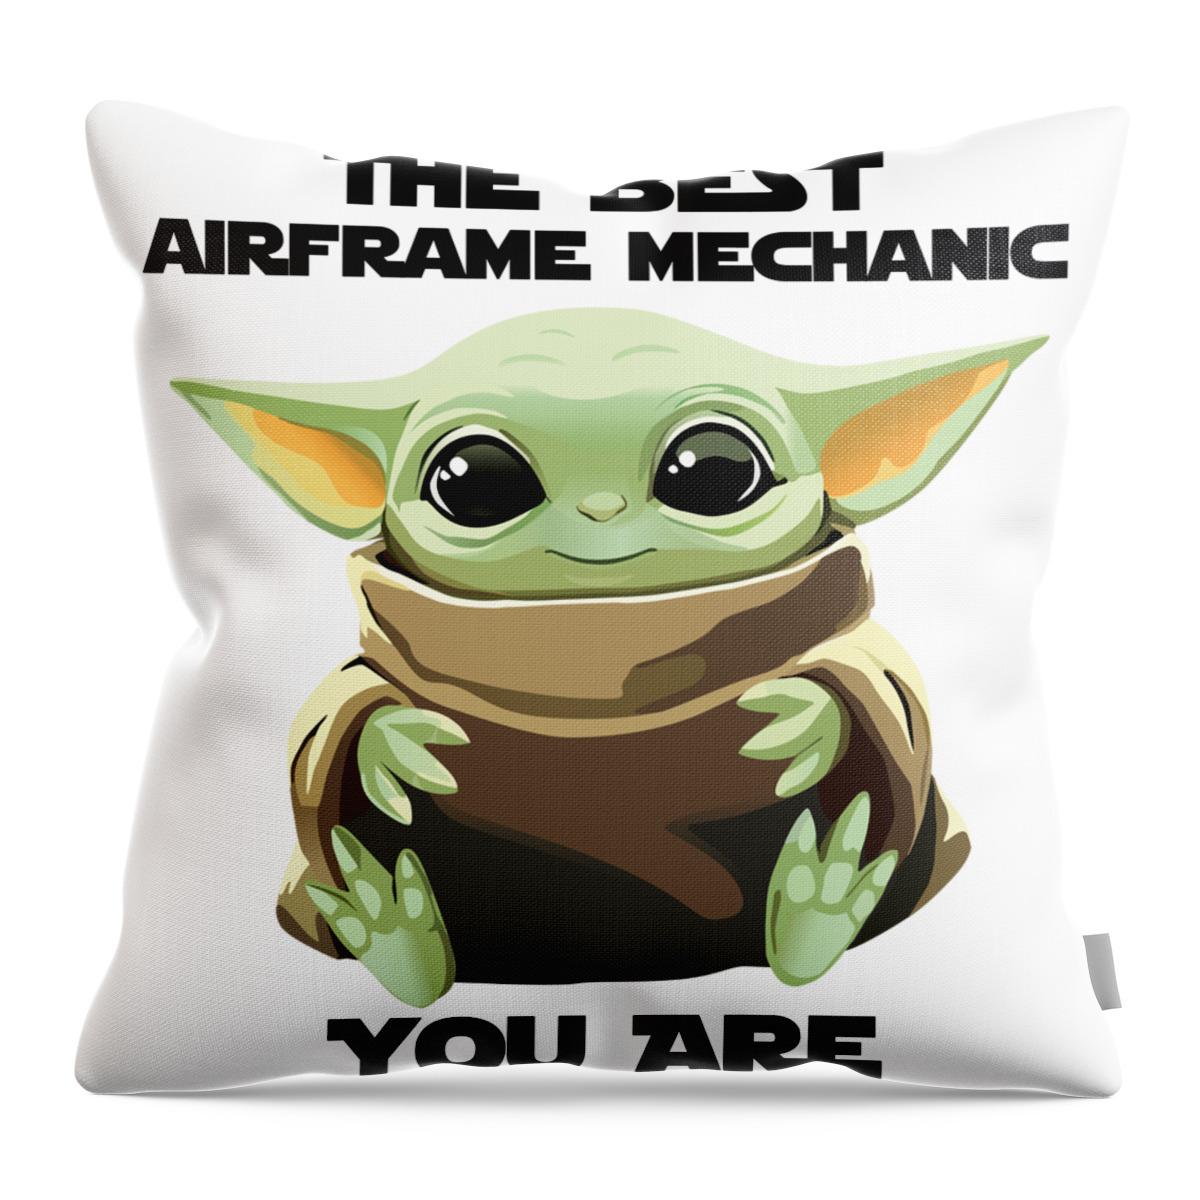 Airframe Mechanic Throw Pillow featuring the digital art The Best Airframe Mechanic You Are Cute Baby Alien Funny Gift for Coworker Present Gag Office Joke Sci-Fi Fan by Jeff Creation